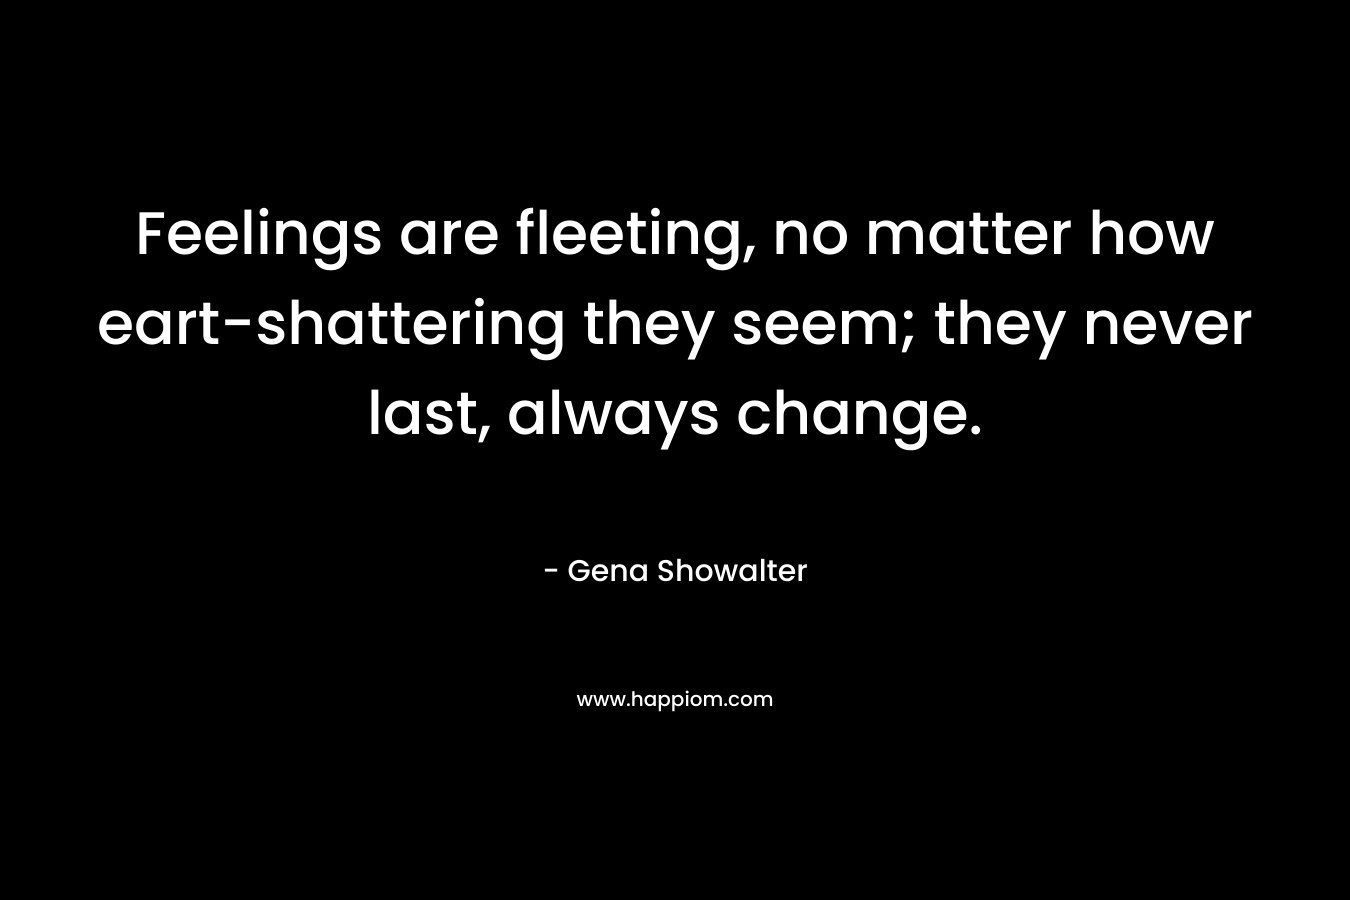 Feelings are fleeting, no matter how eart-shattering they seem; they never last, always change.